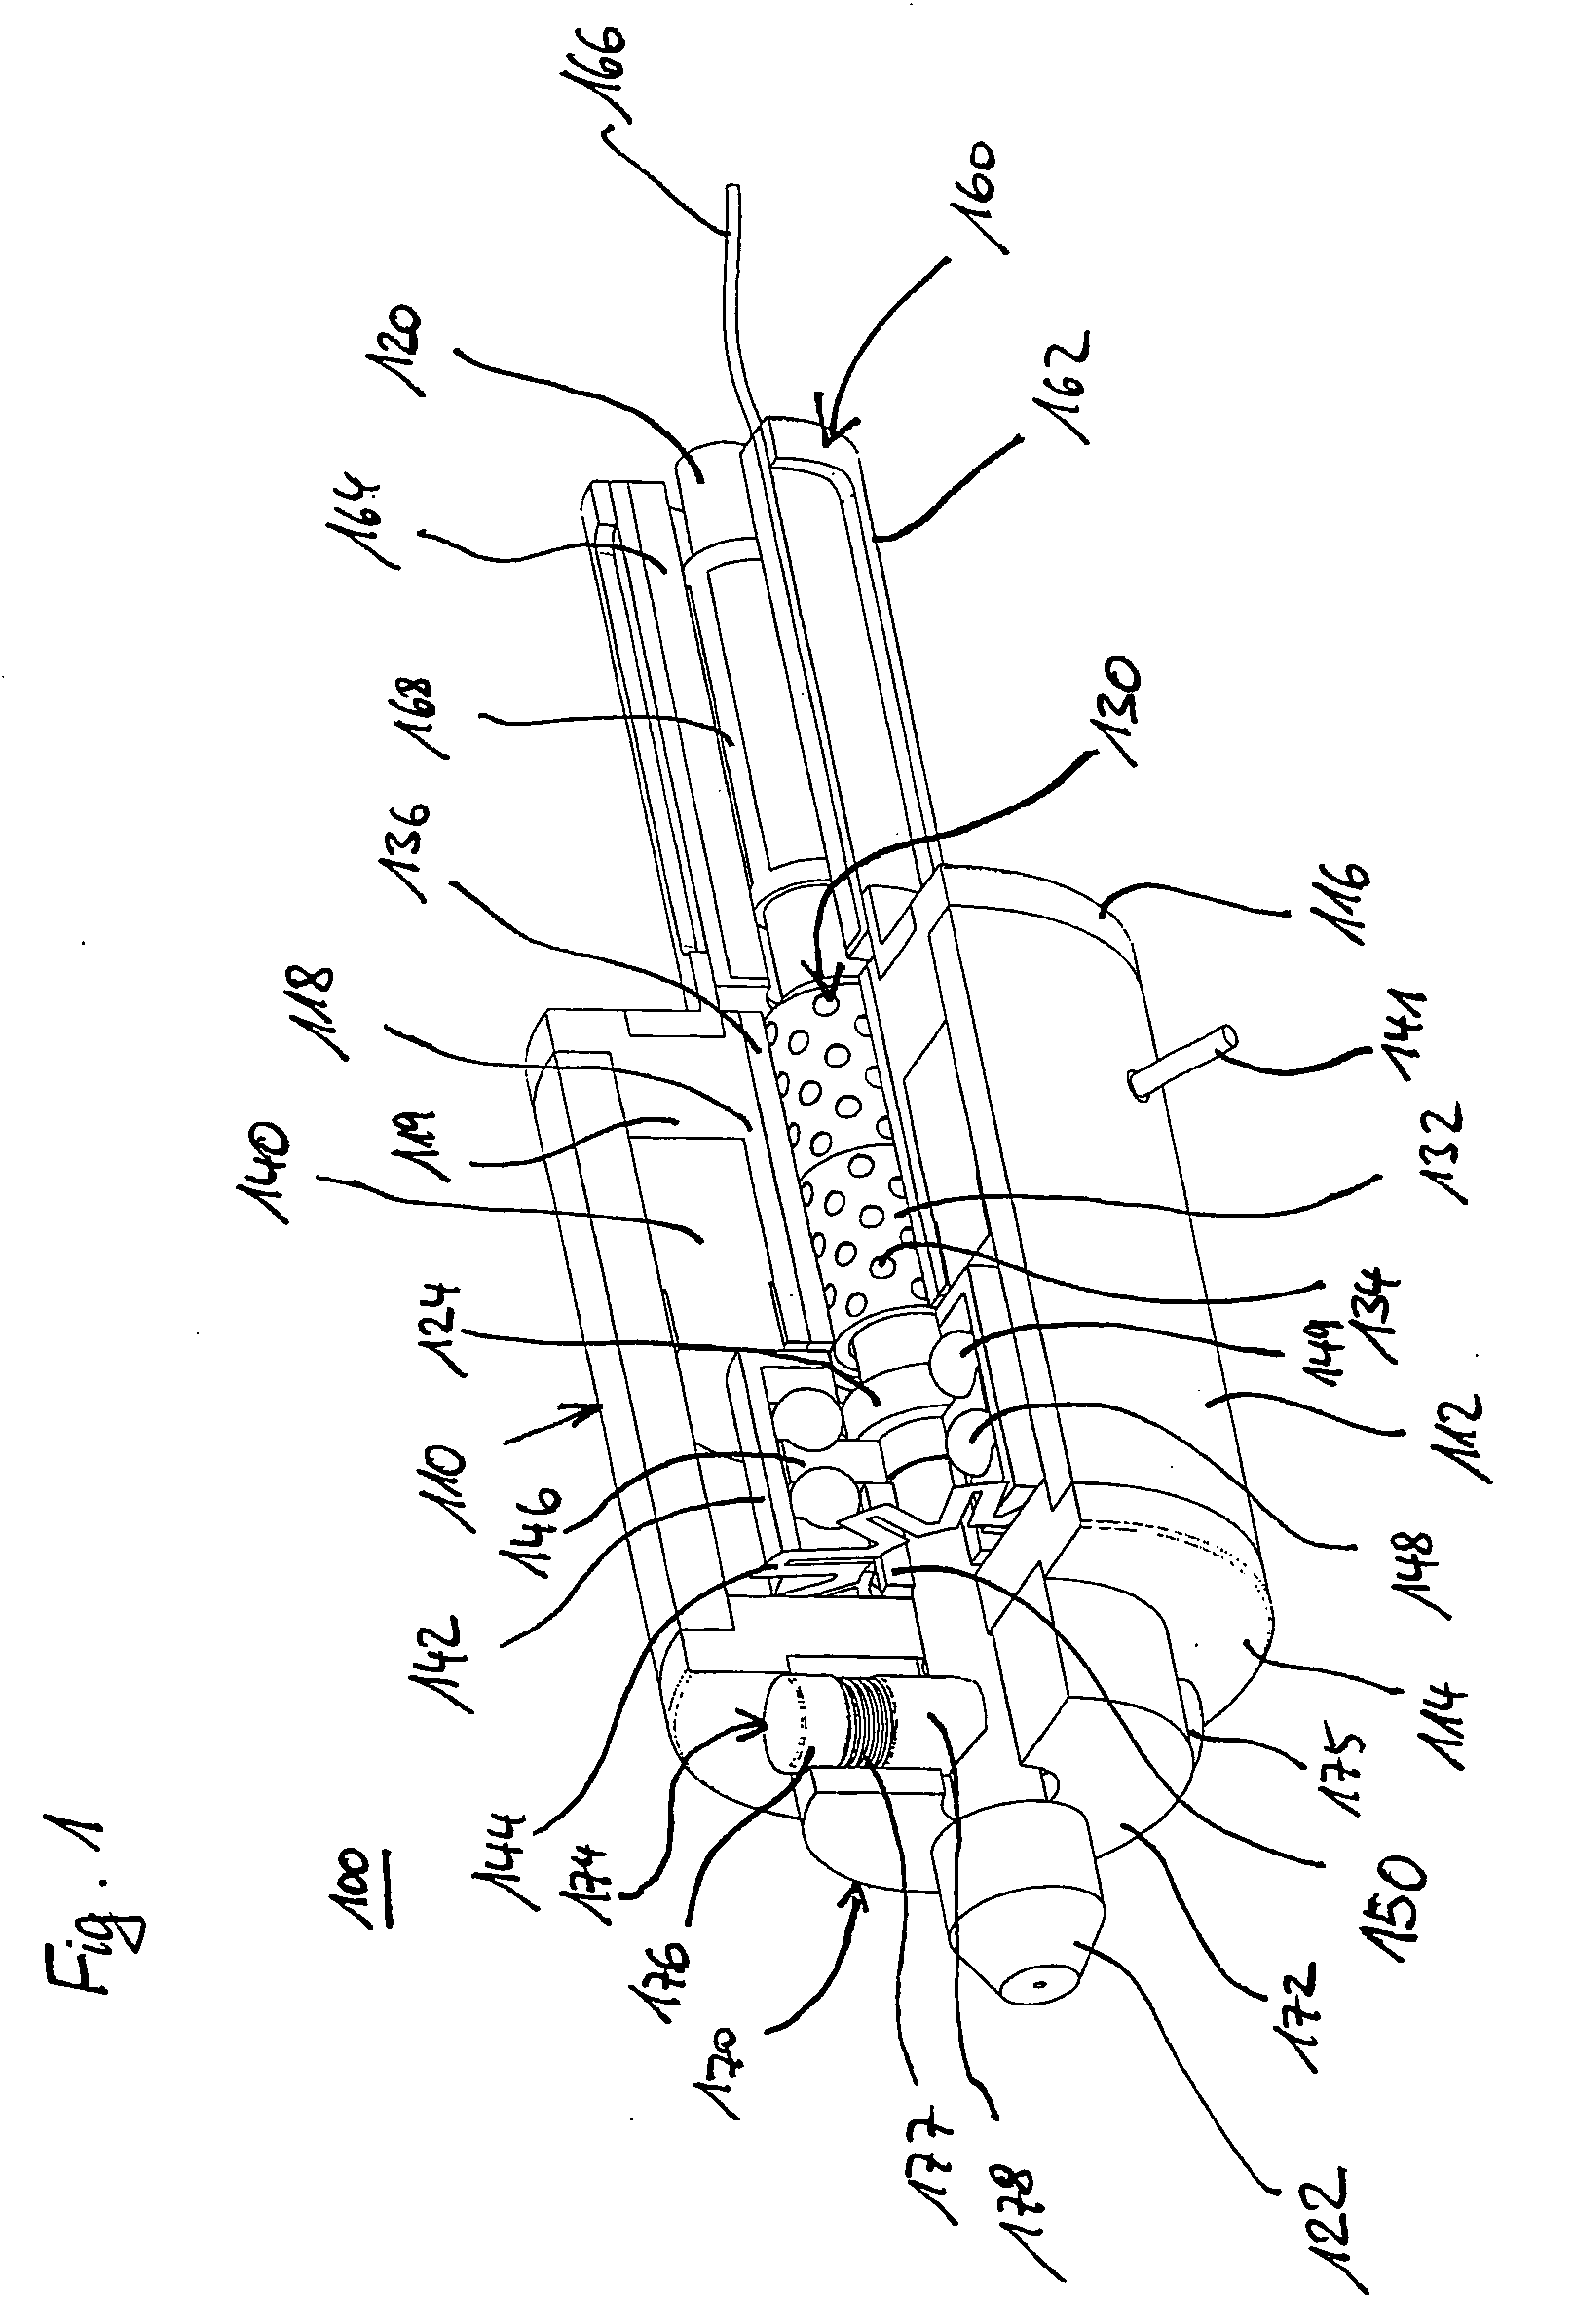 Drive device for erosion tools